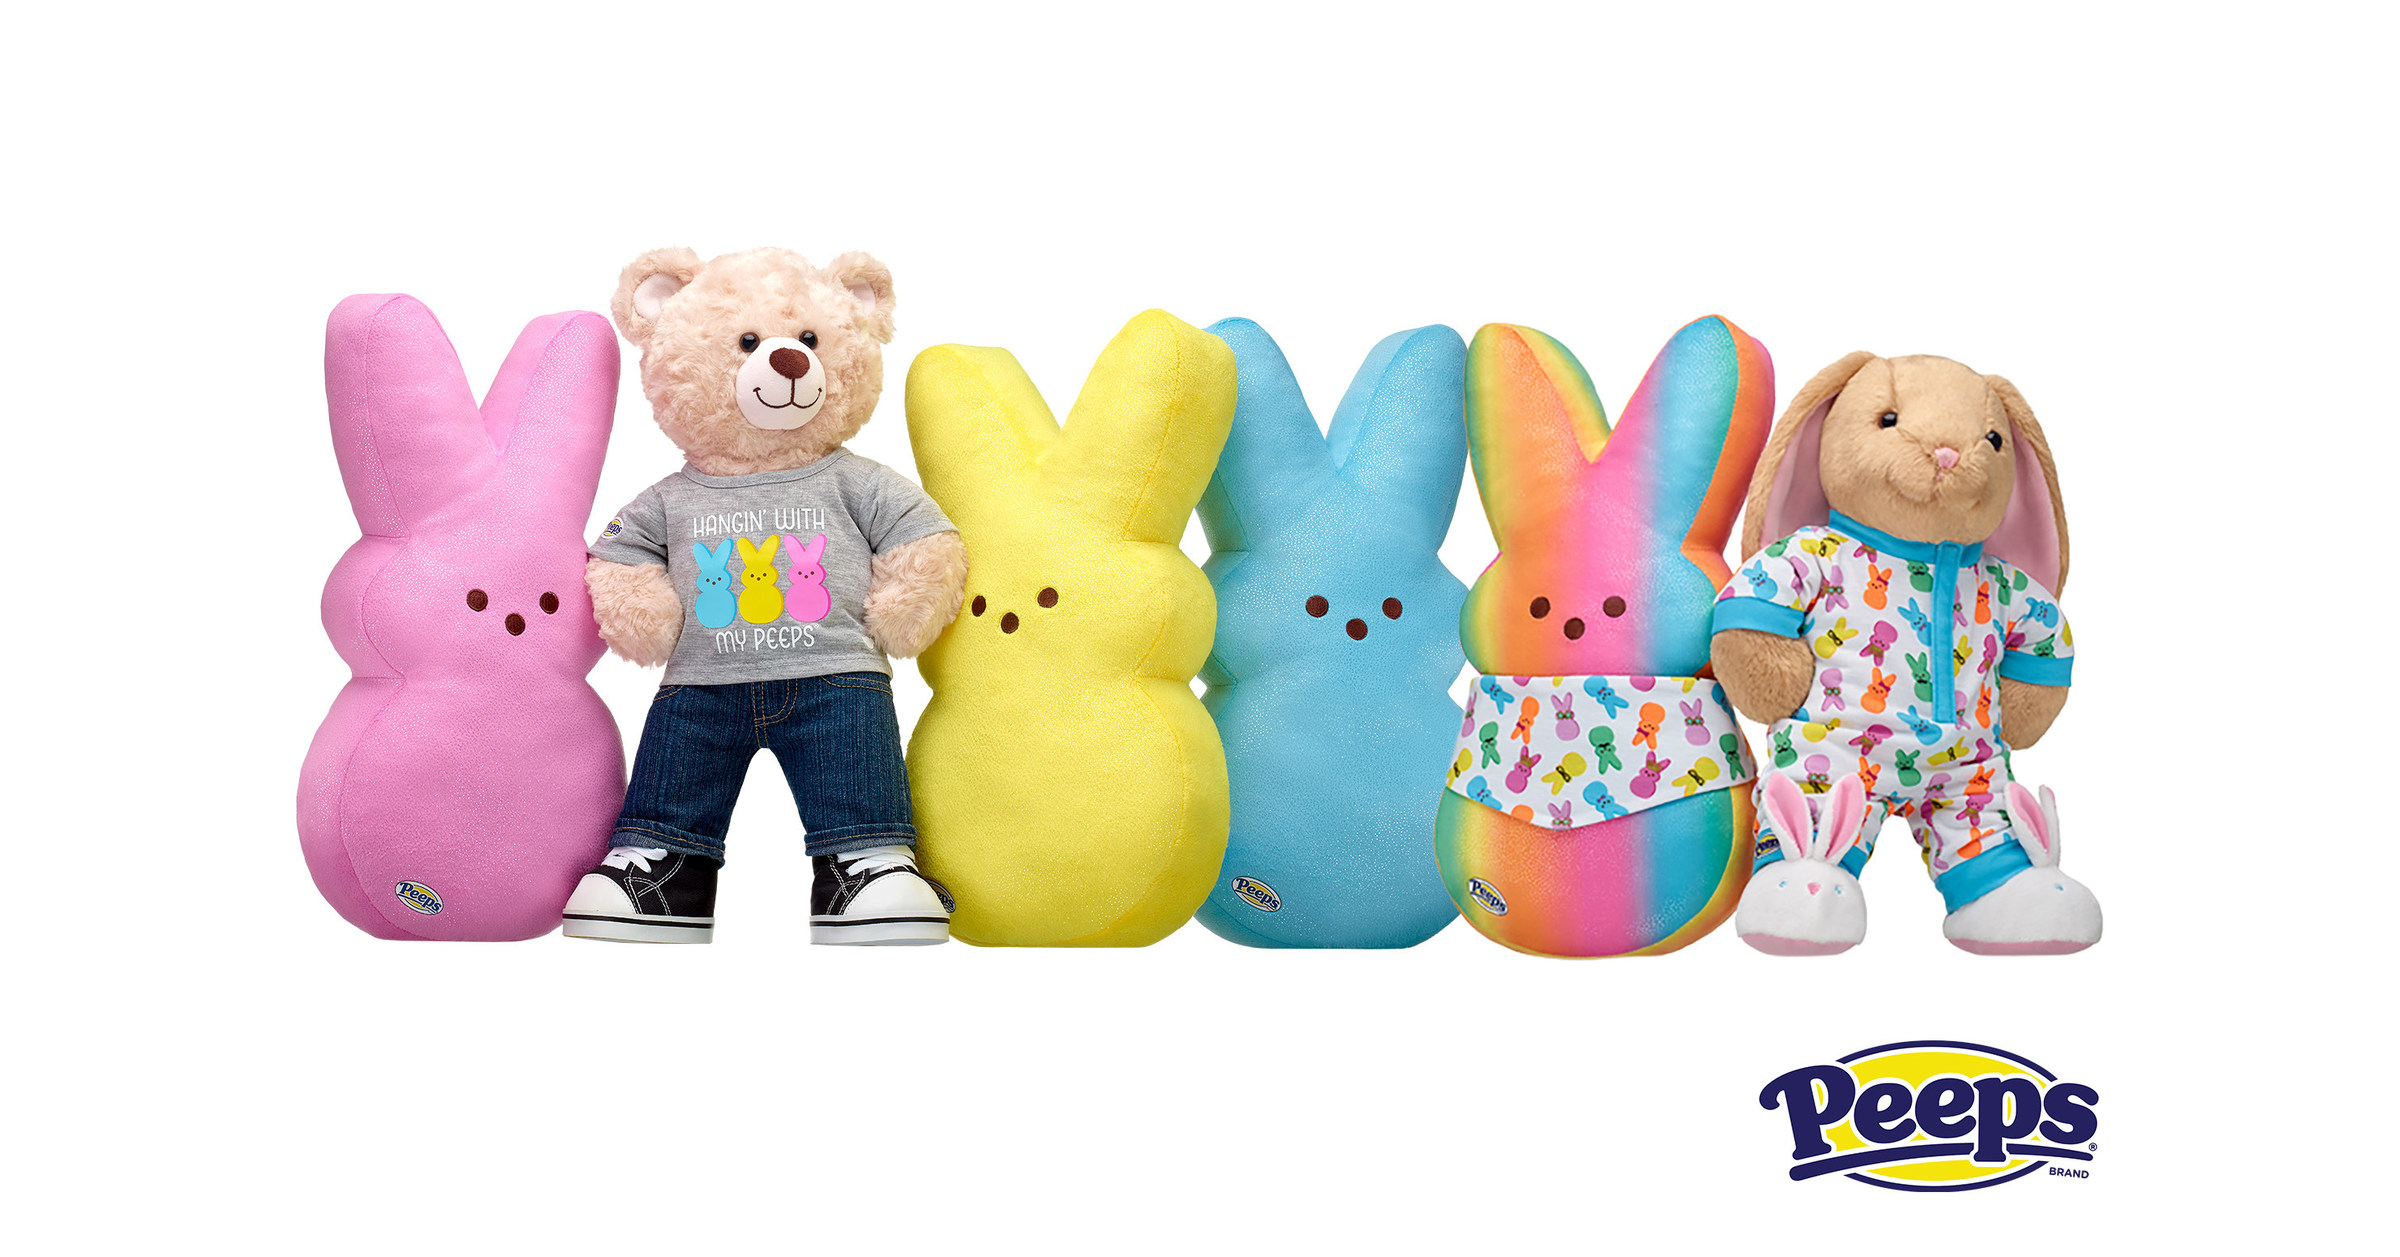 PEEPS® Brand Teams Up With BuildABear For An AllNew Easter